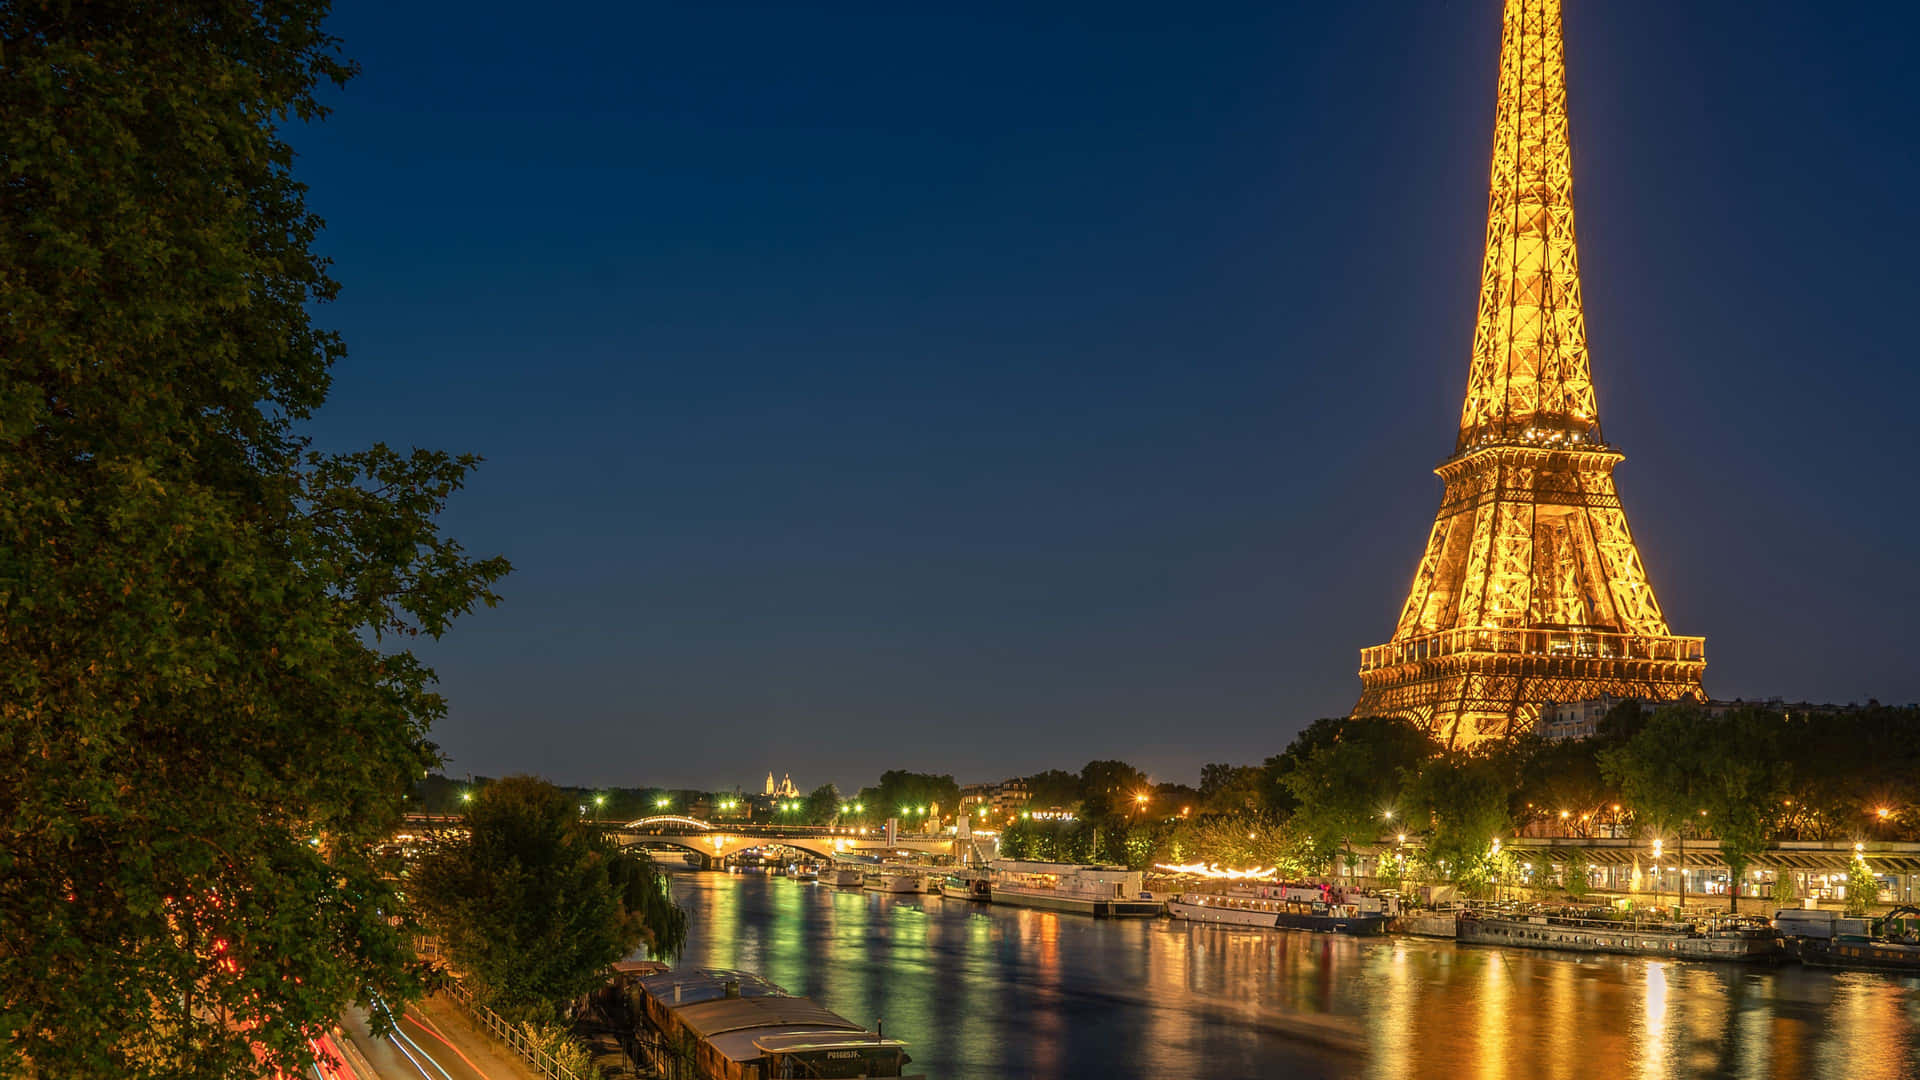 Paris At Night - A City Of Lights Background